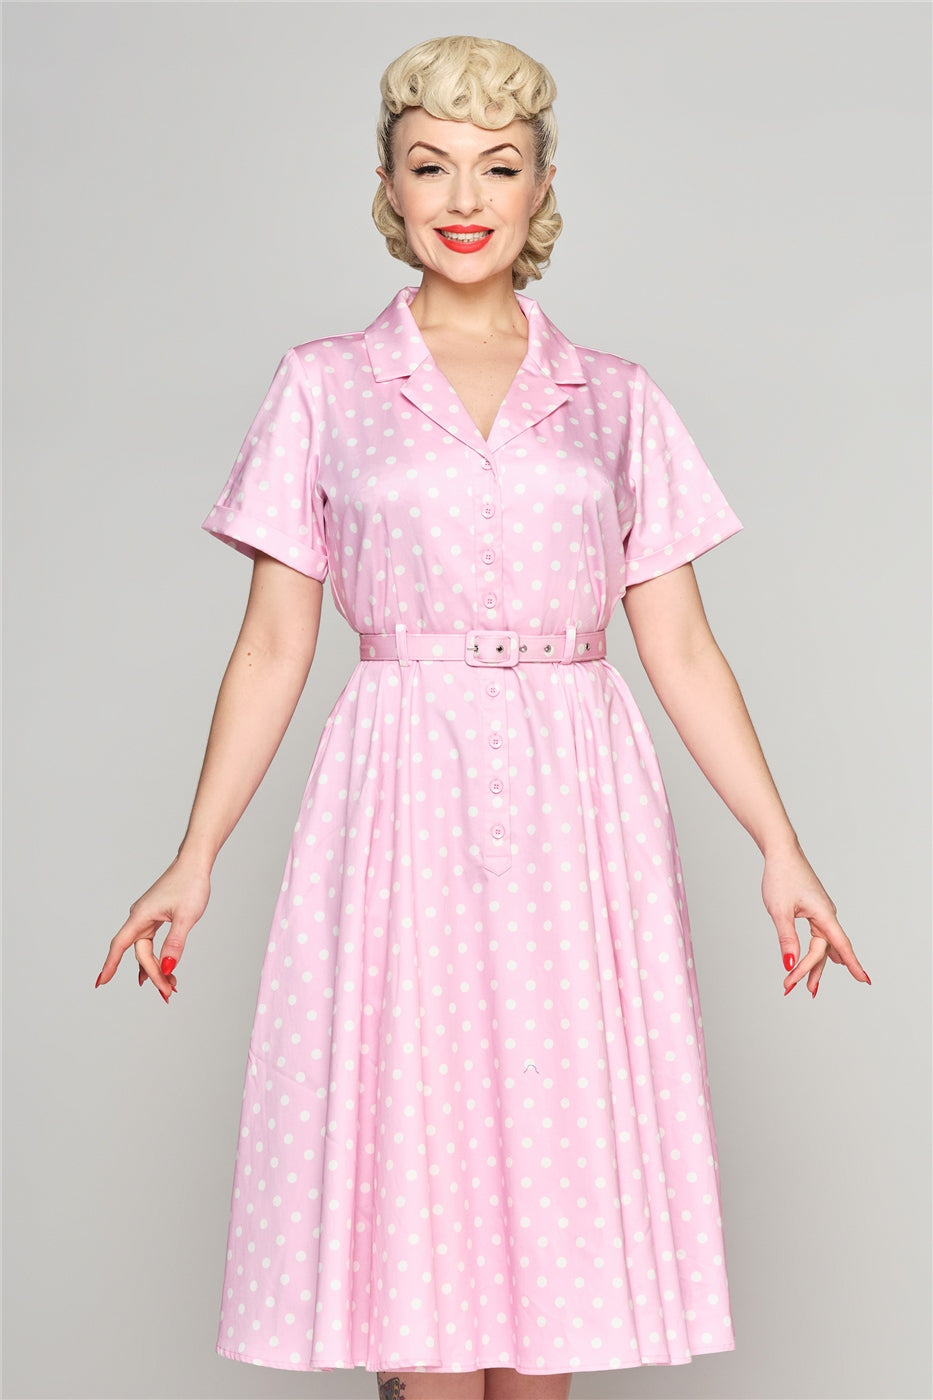 Elegant blonde woman with her hair in an up-do standing wearing a pink polka dot shirt dress with a matching belt.